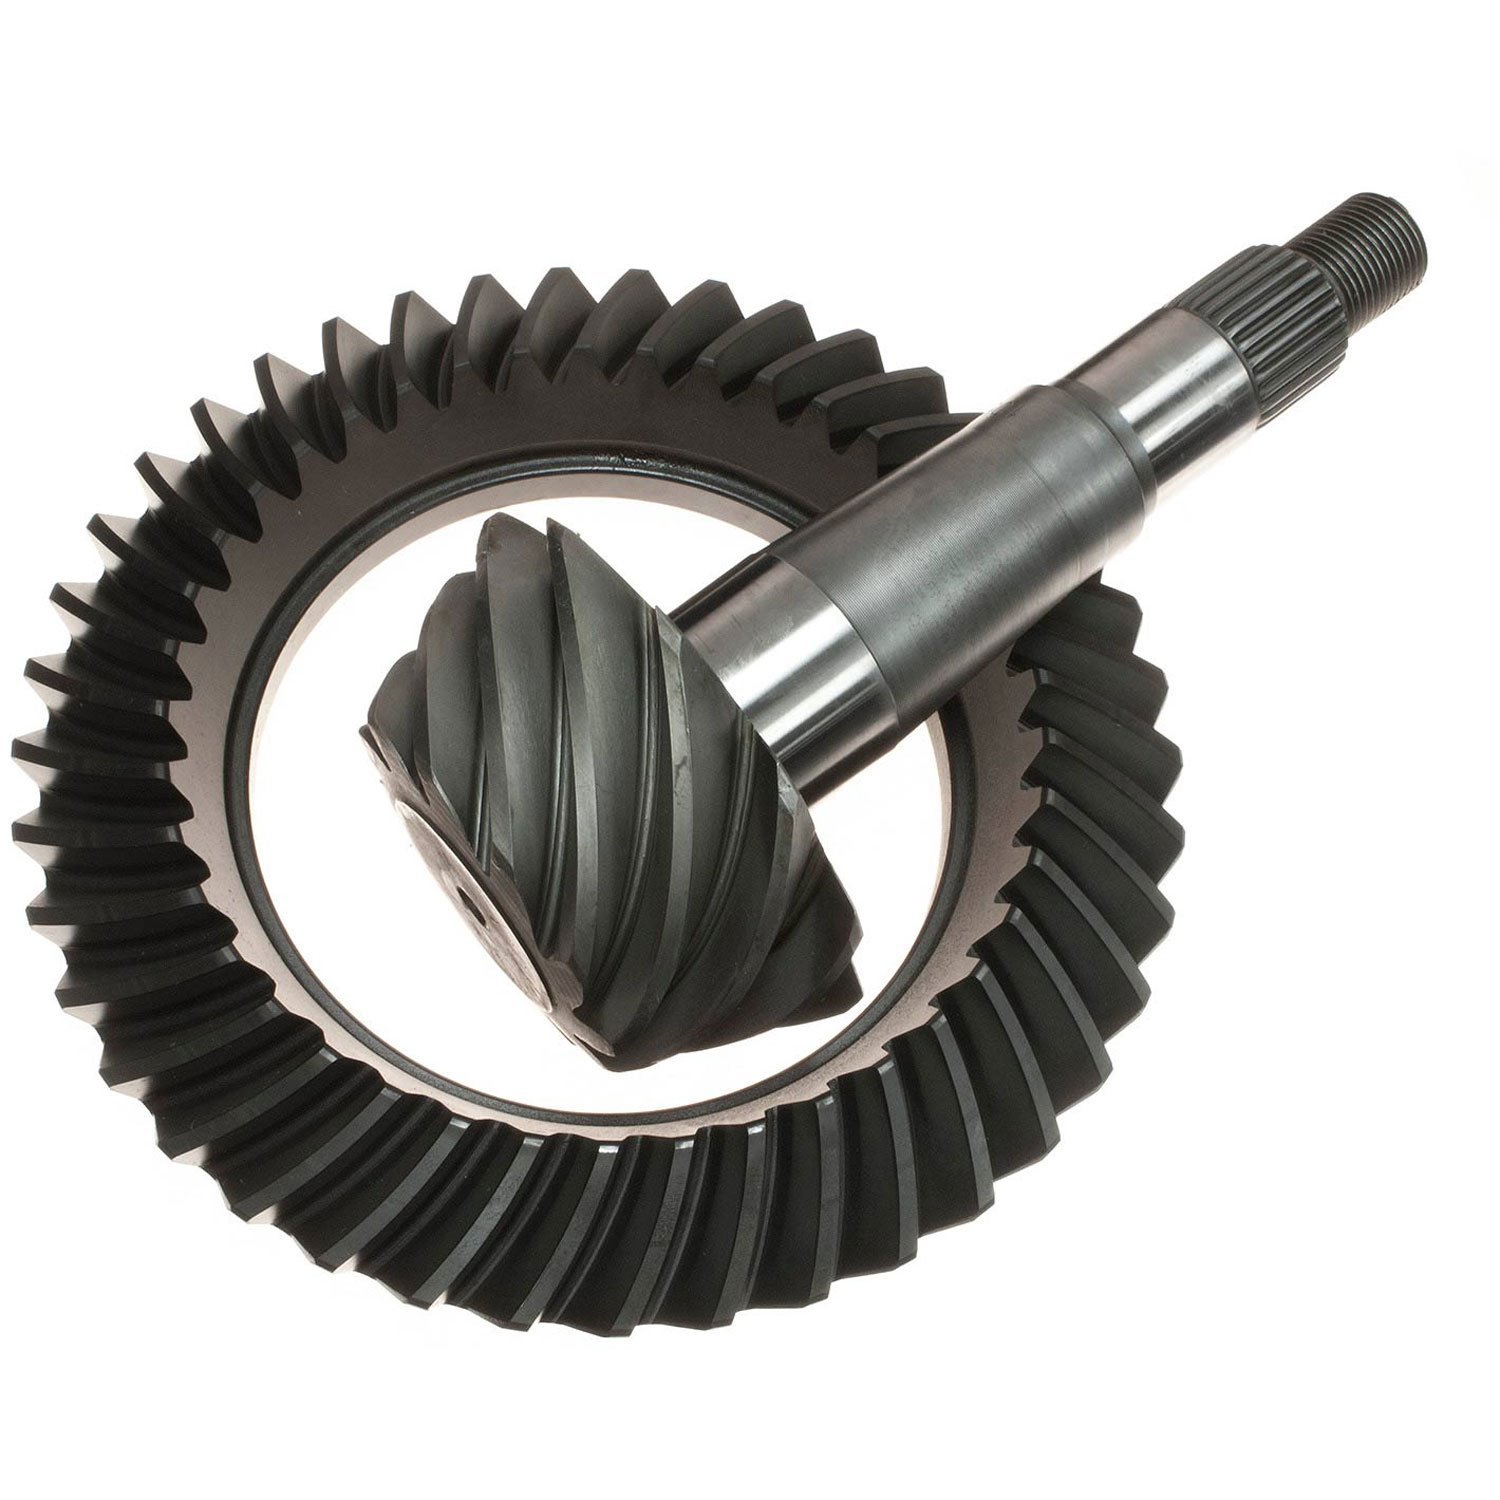 Ring & Pinion Gears Chrysler & Jeep 8.25" & 8.375"